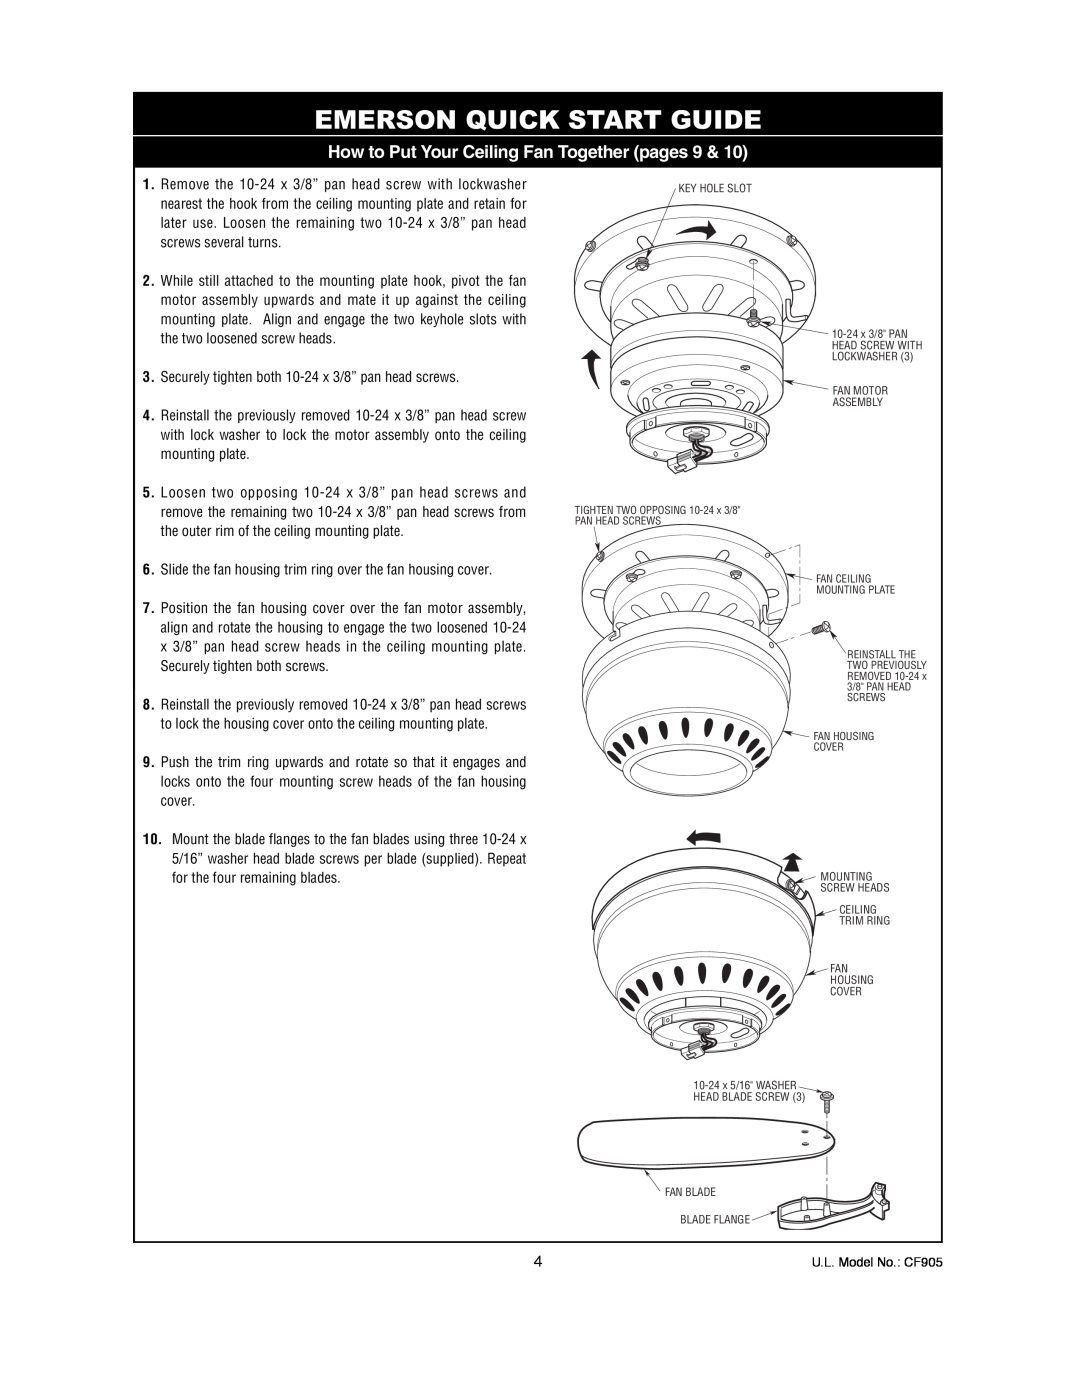 Emerson CF905ORB00, CF905GES00, CF905BS00, CF905VNB00 How to Put Your Ceiling Fan Together pages, Emerson Quick Start Guide 